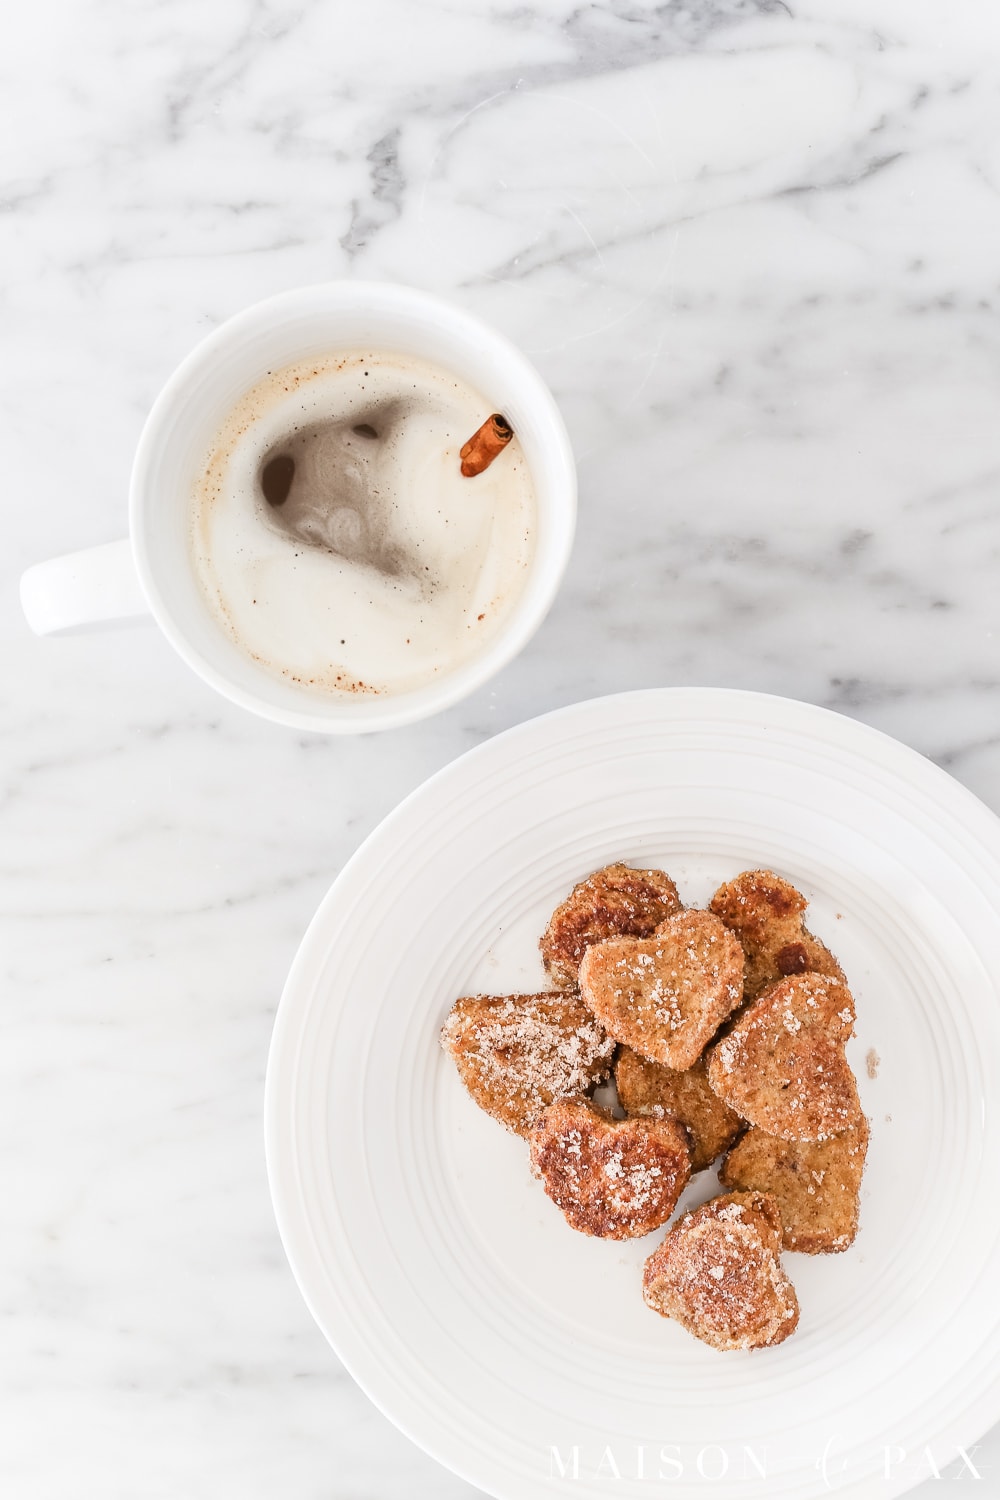 Heart French toast bites make the perfect Valentines breakfast. Get the full recipe for this easy treat! #valentinesrecipe #valentinesbreakfast #hearttoast #frenchtoast #valentinestreat